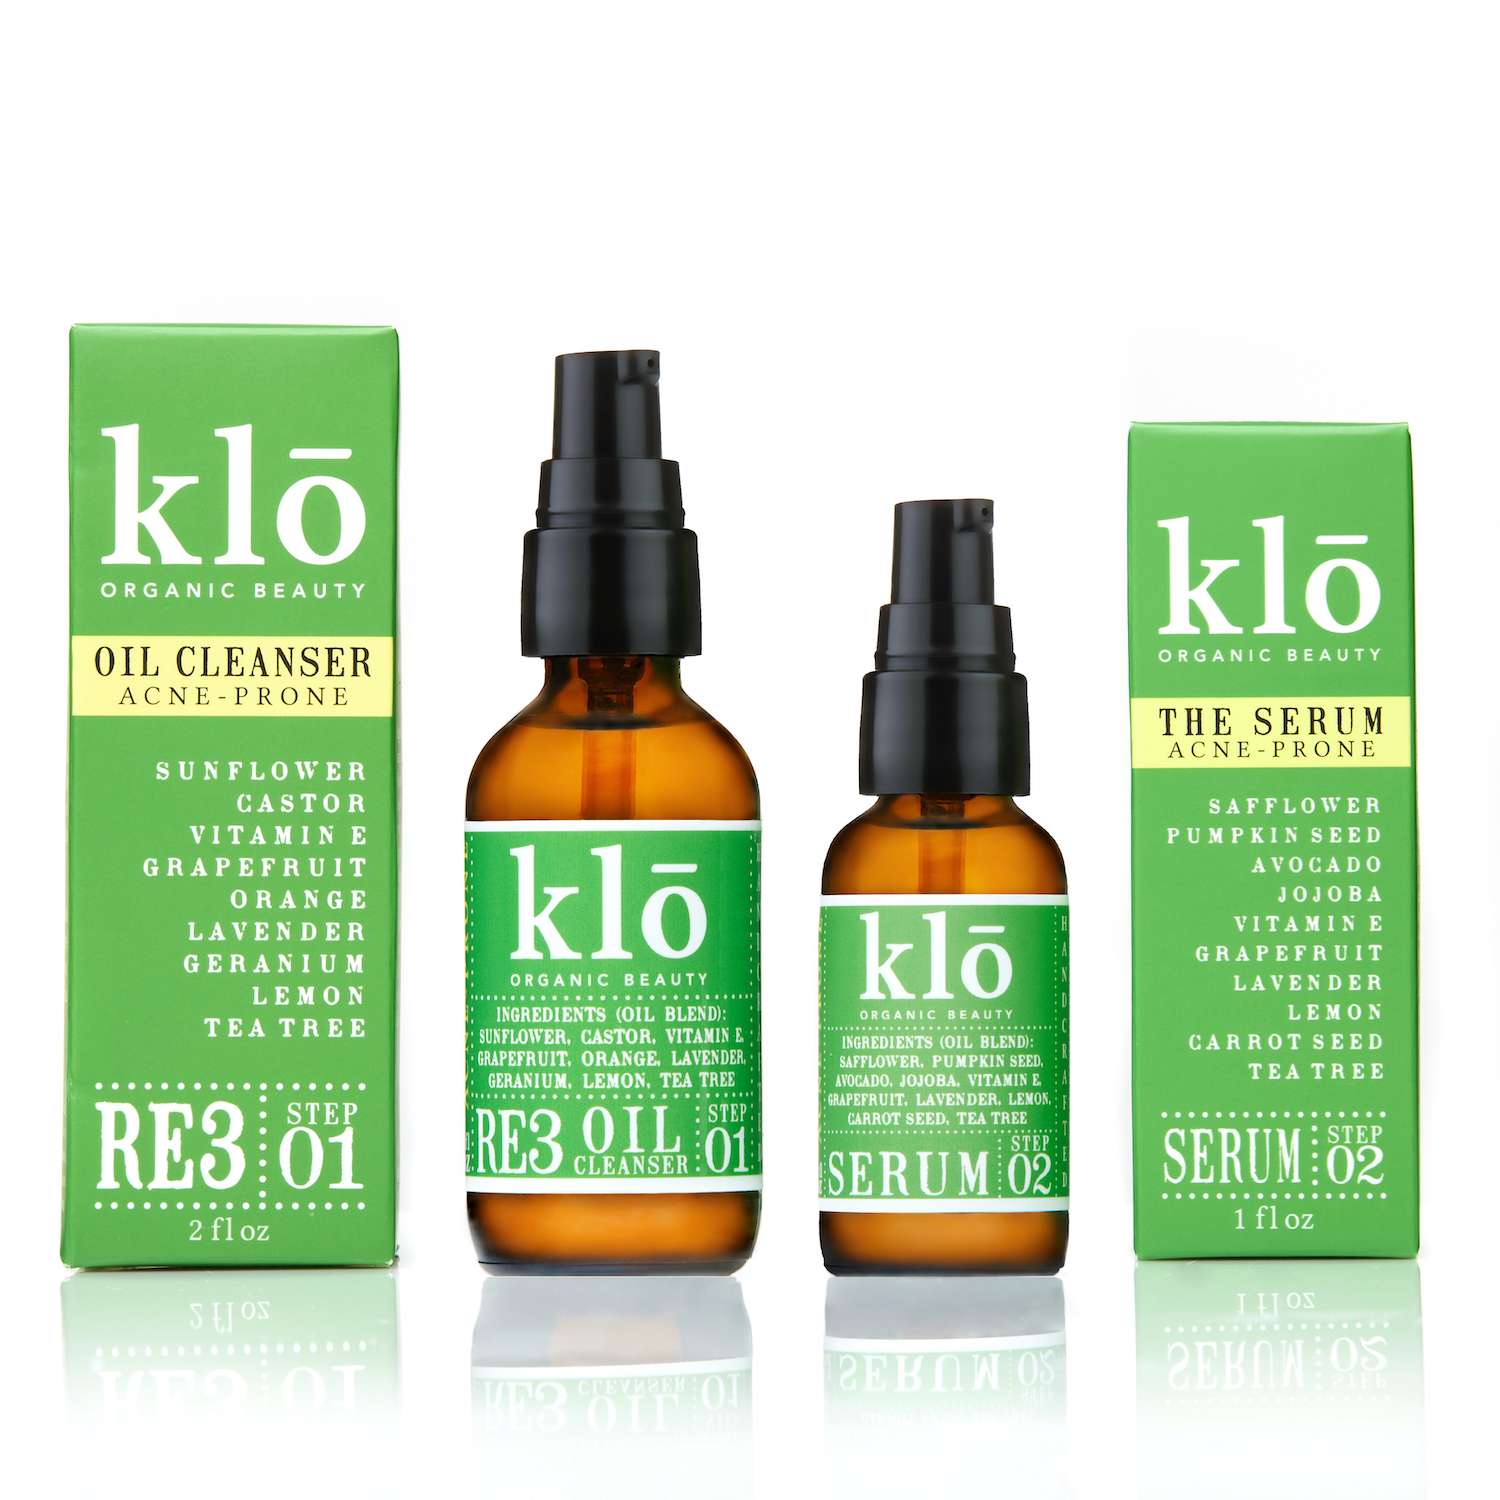 Klo Organic Beauty RE3 oil cleanser and serum duo for acne-prone skin bottles and boxes.